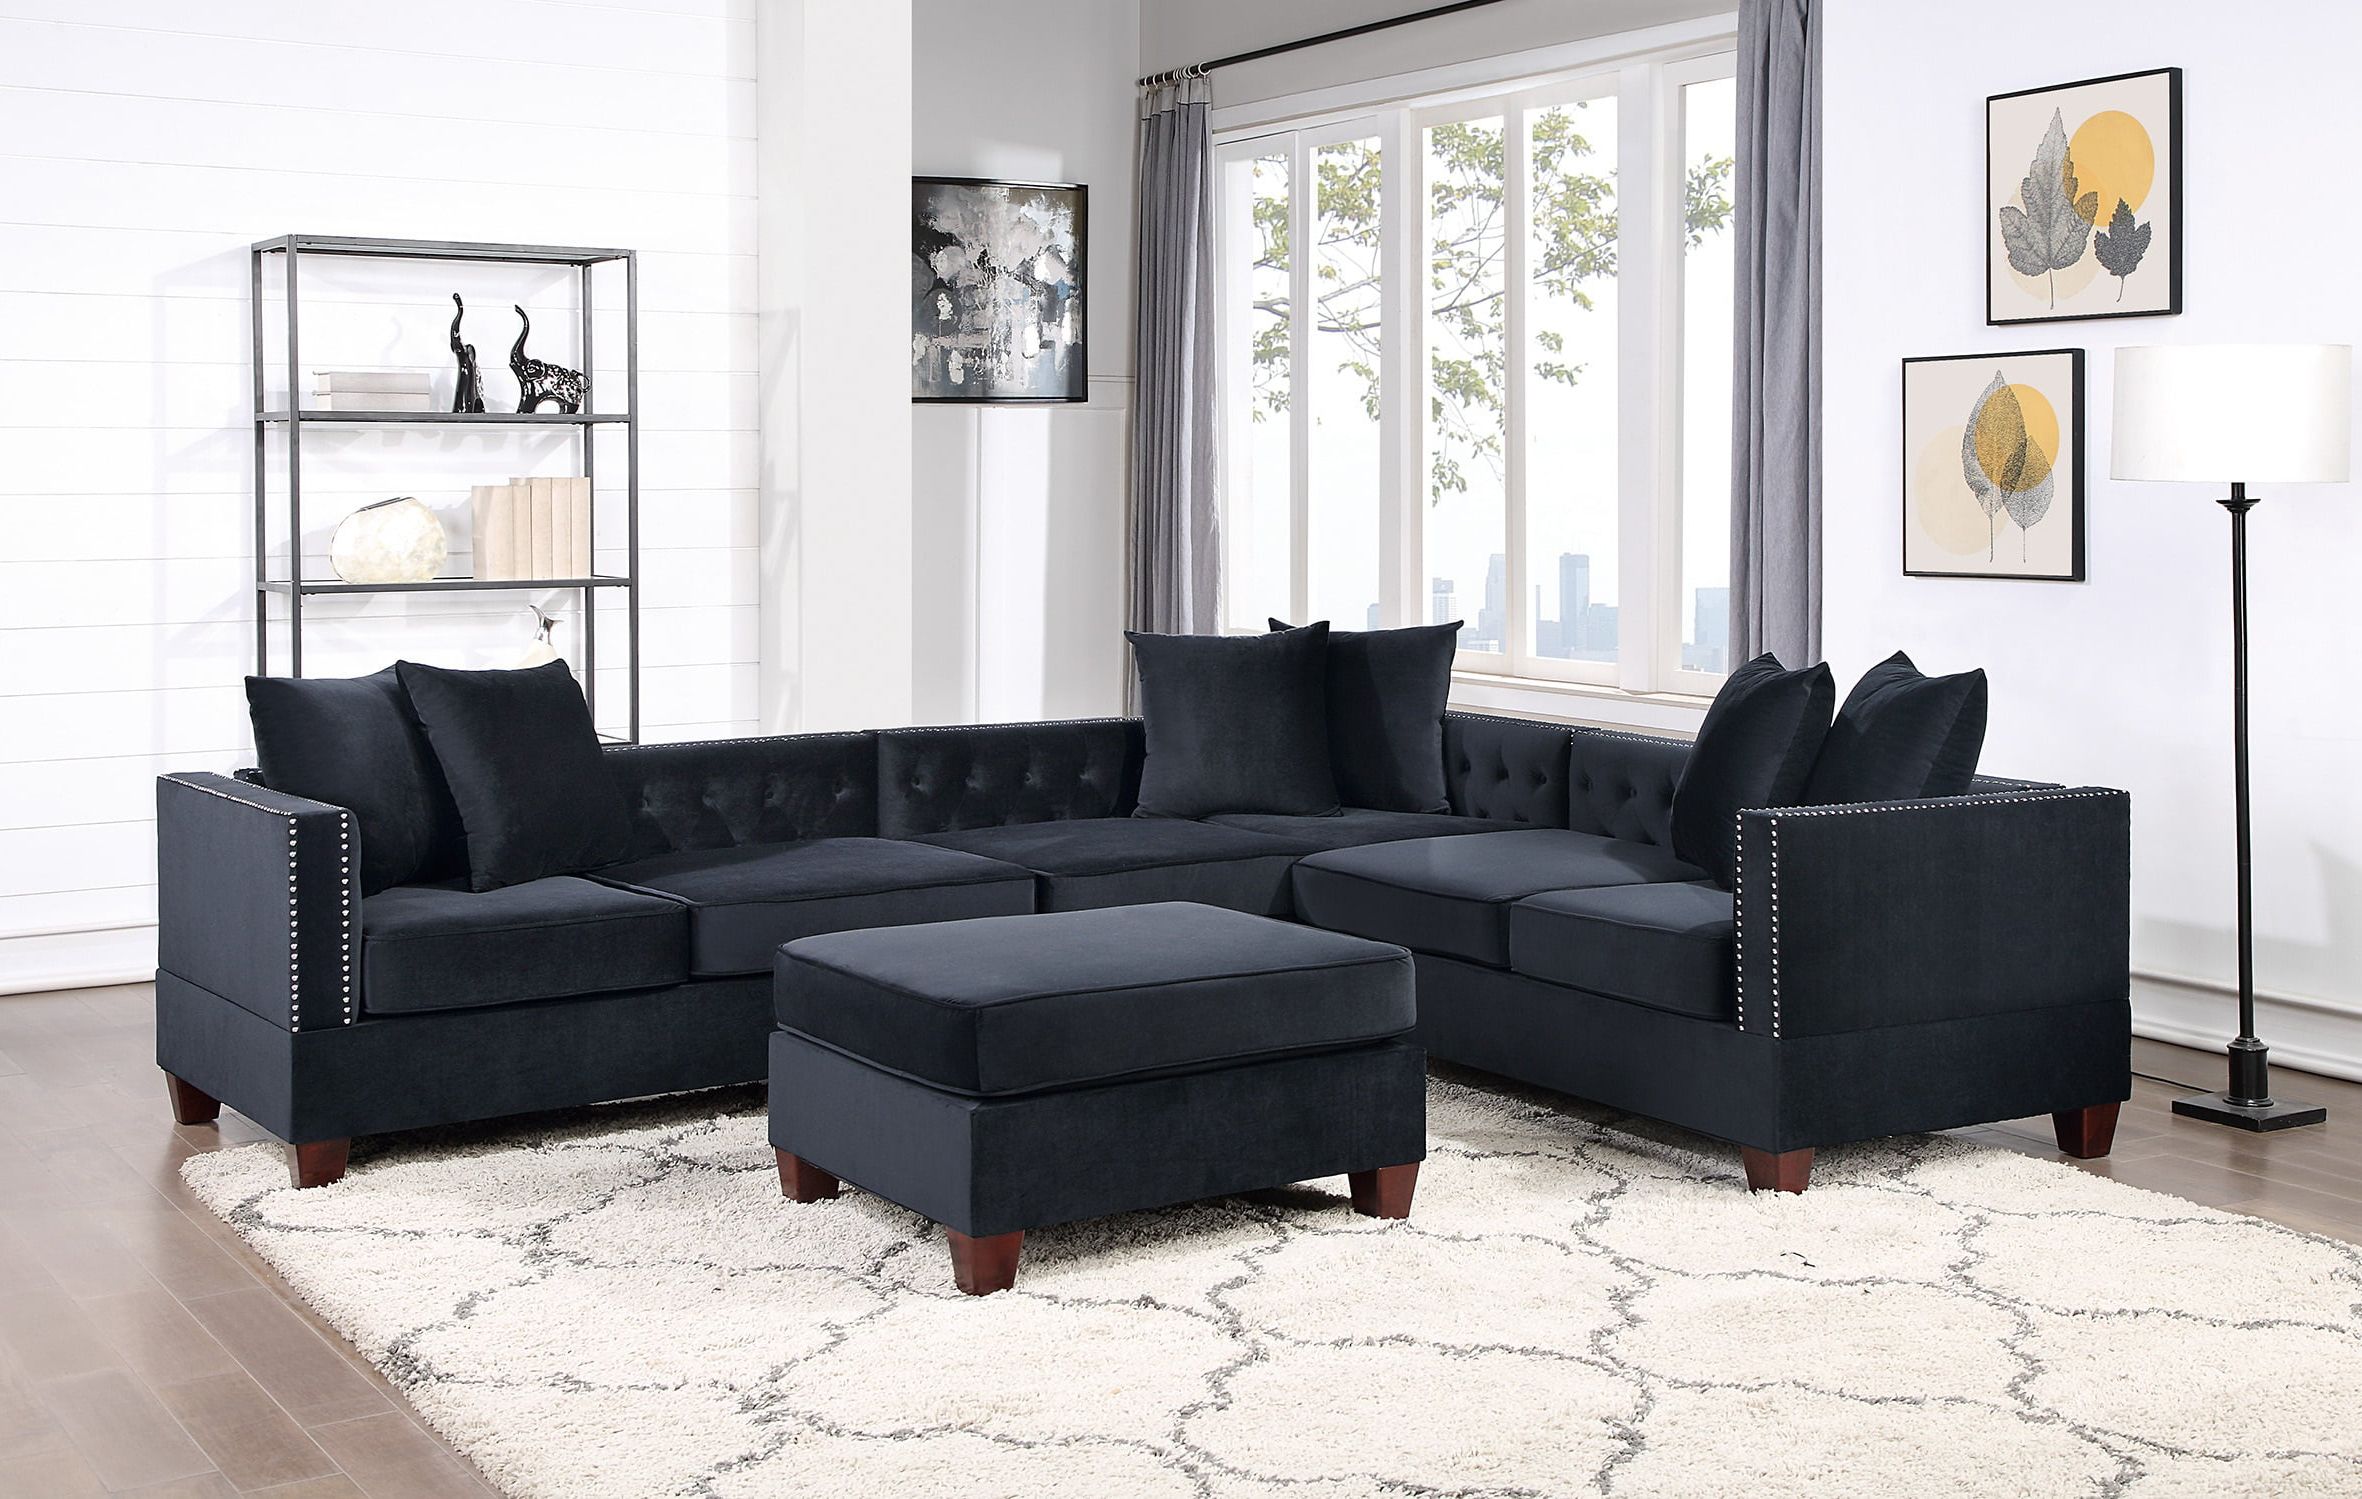 Black Velvet Fabric Solidwood Sectional 4pc Set Reversible Chaise /  Loveseats Ottoman Tufted Cushion Couch Pillows Living Room – Walmart For Sectional Sofas With Ottomans And Tufted Back Cushion (Gallery 3 of 20)